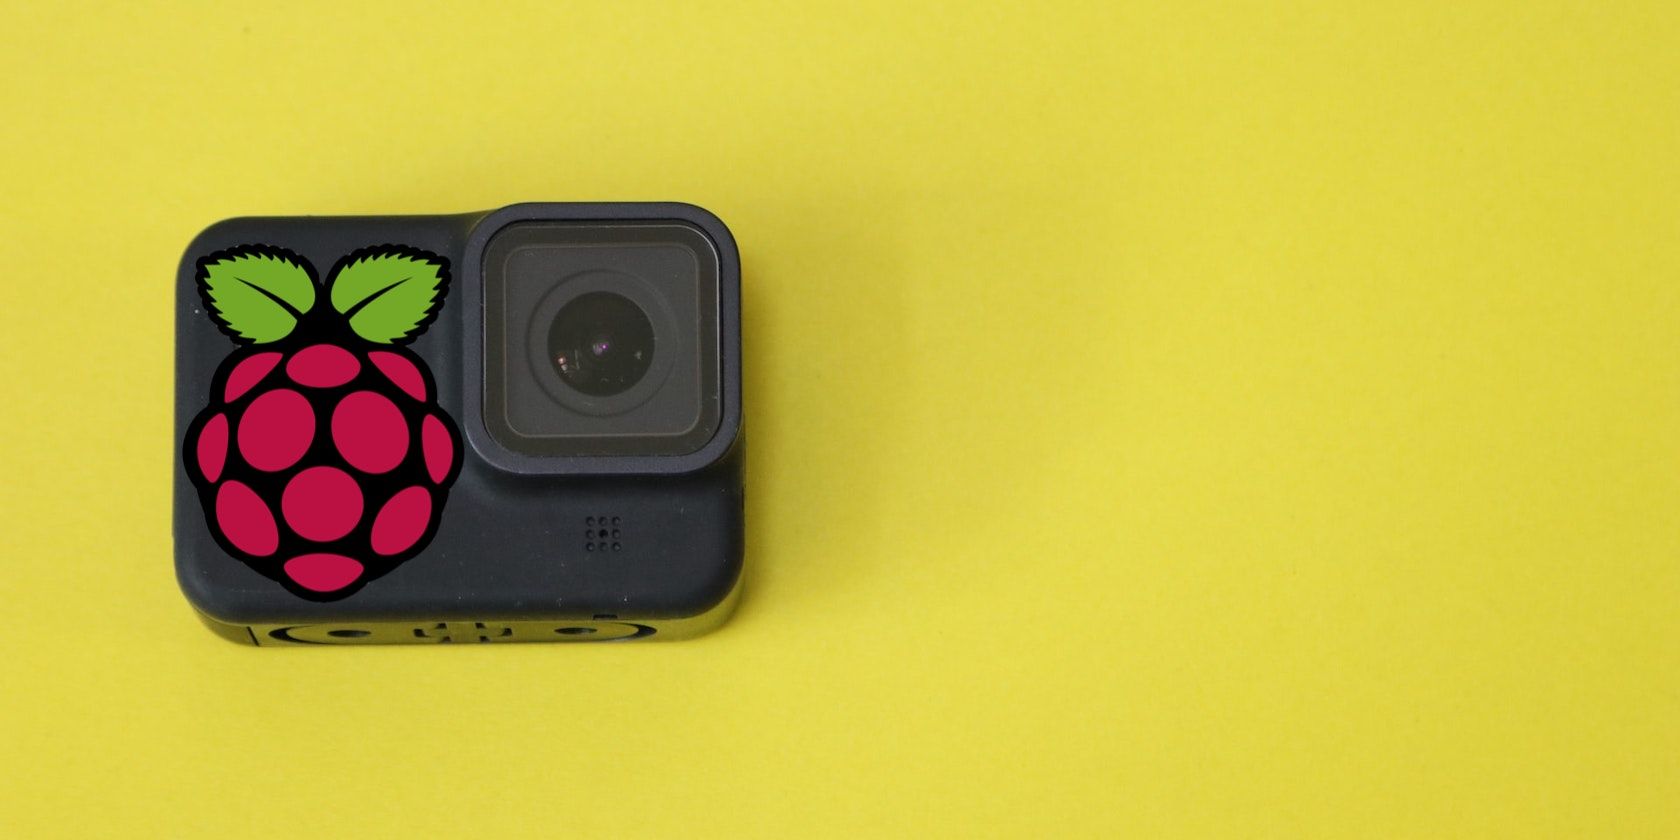 A small square camera with the Raspberry Pi logo on top set against a bright yellow background